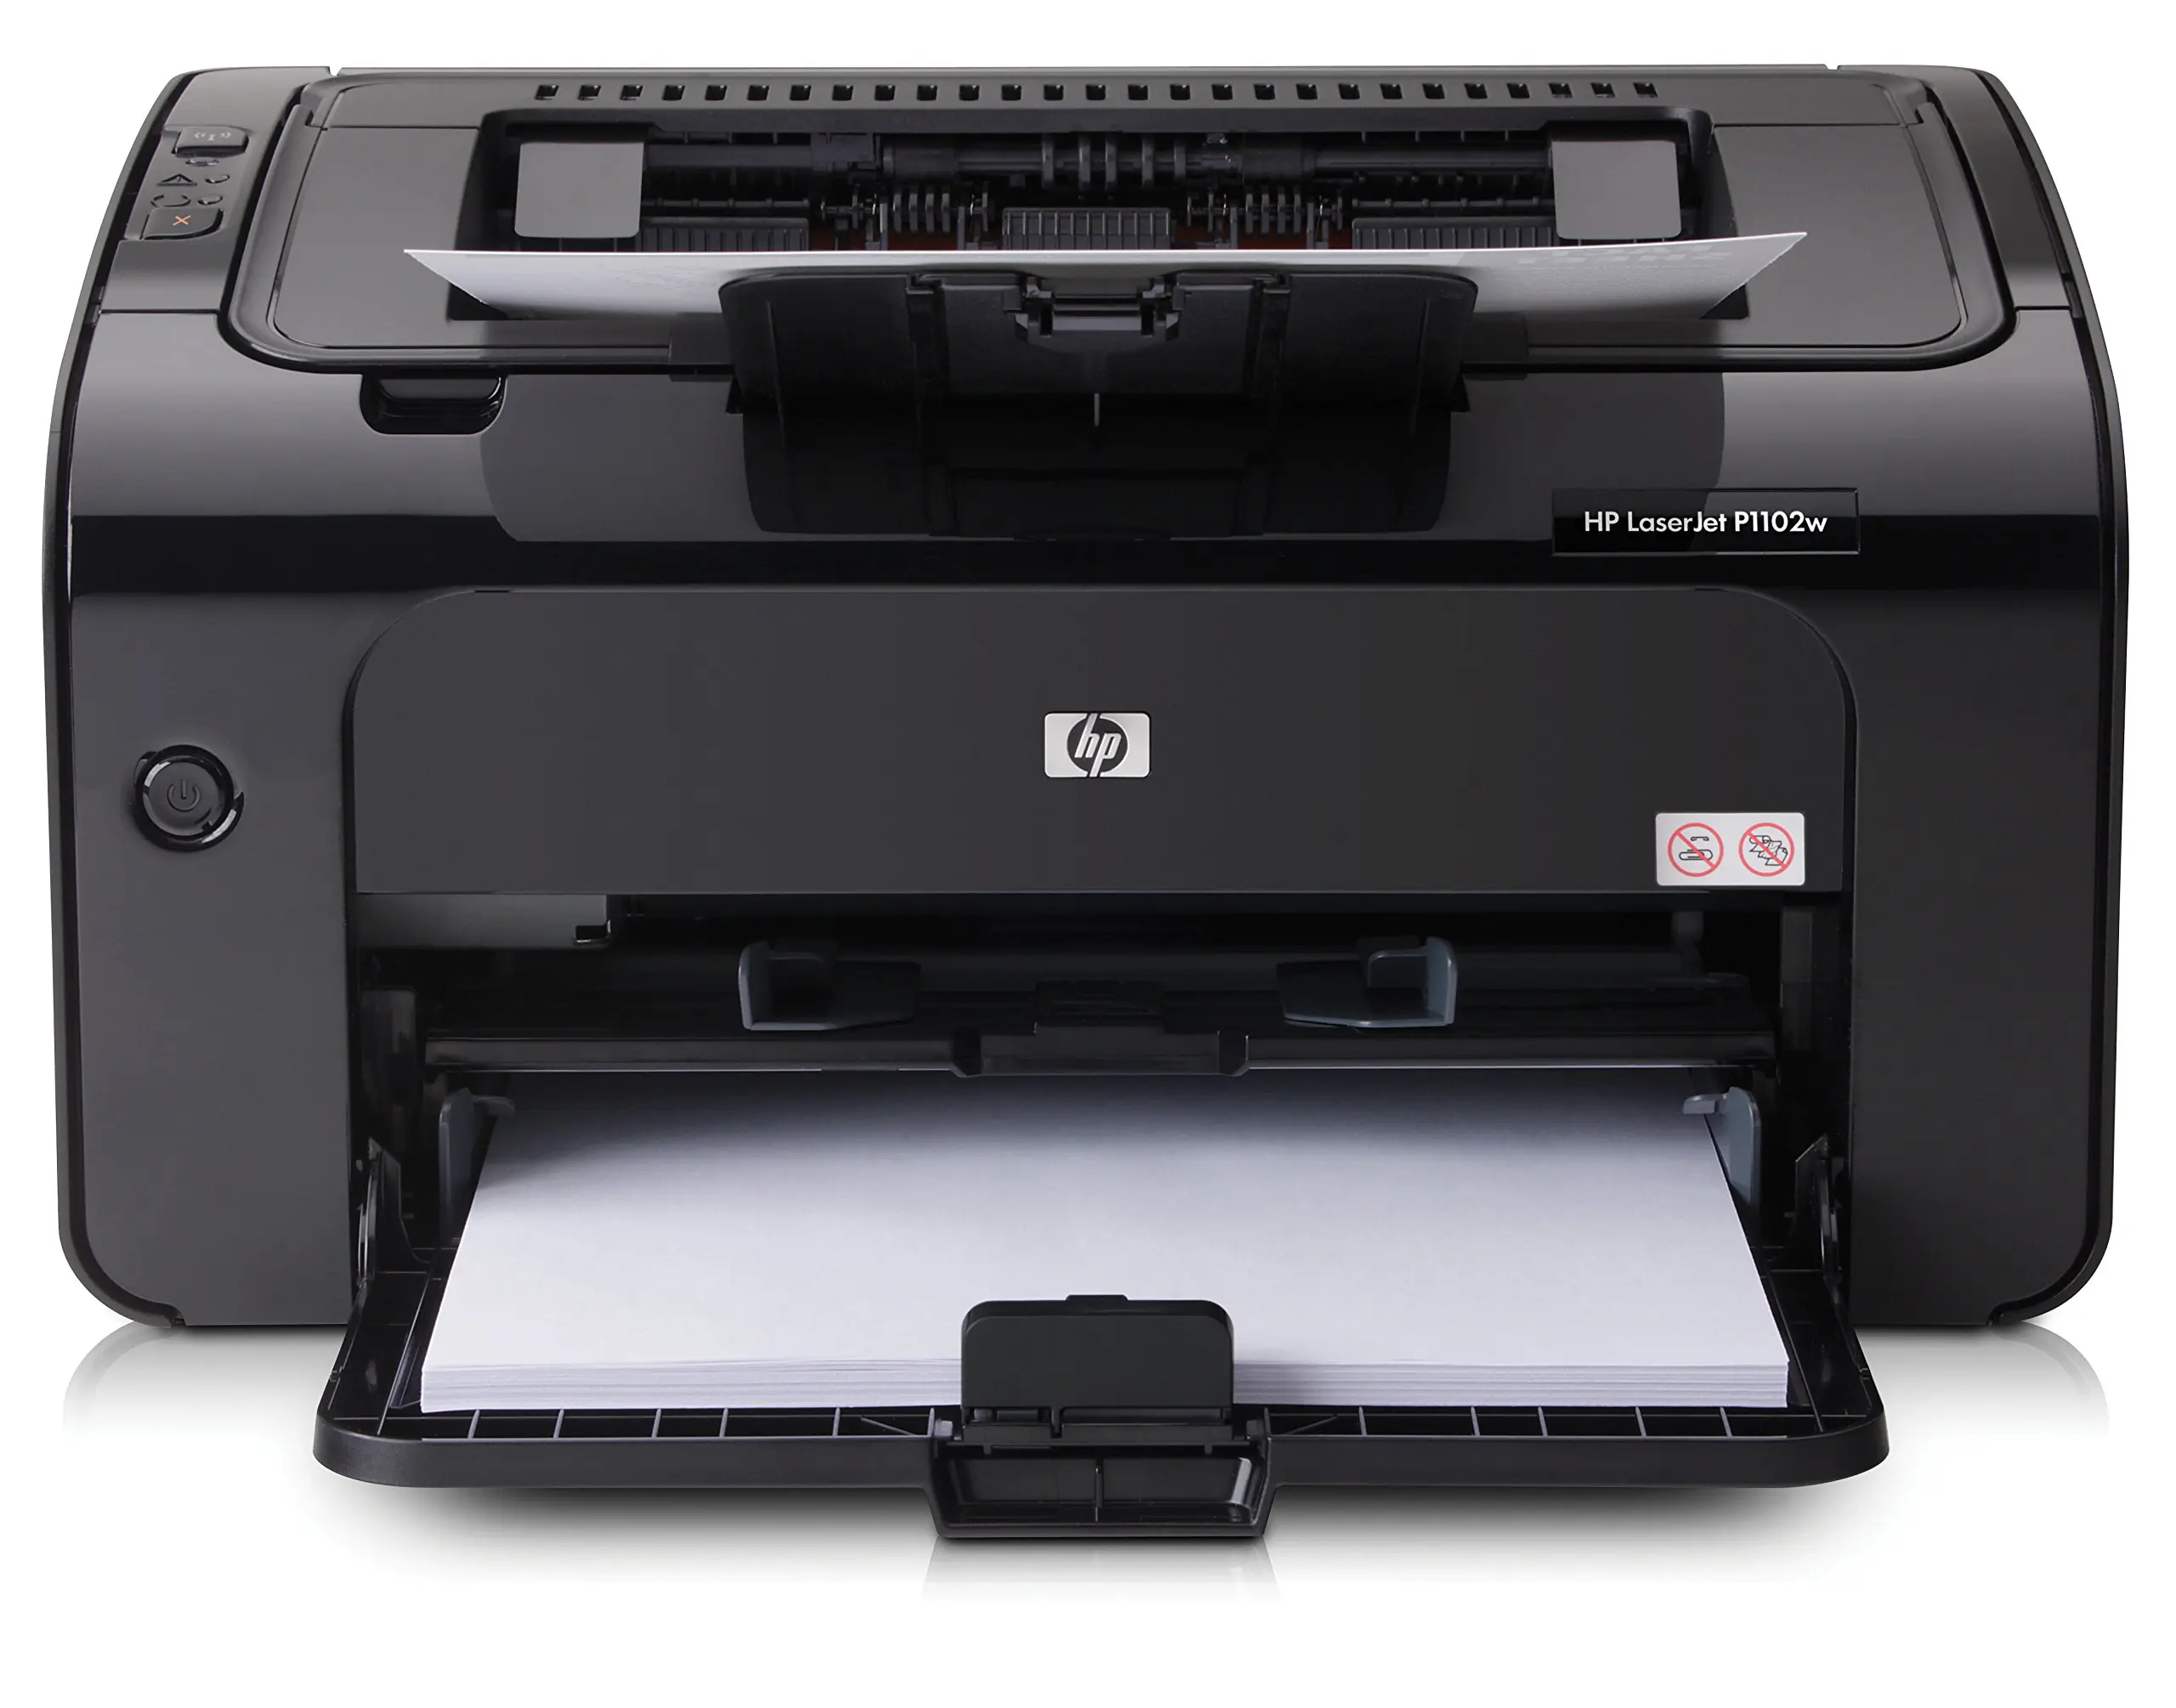 hewlett-packard hp laserjet professional p1102w linux - Are HP printers Linux compatible